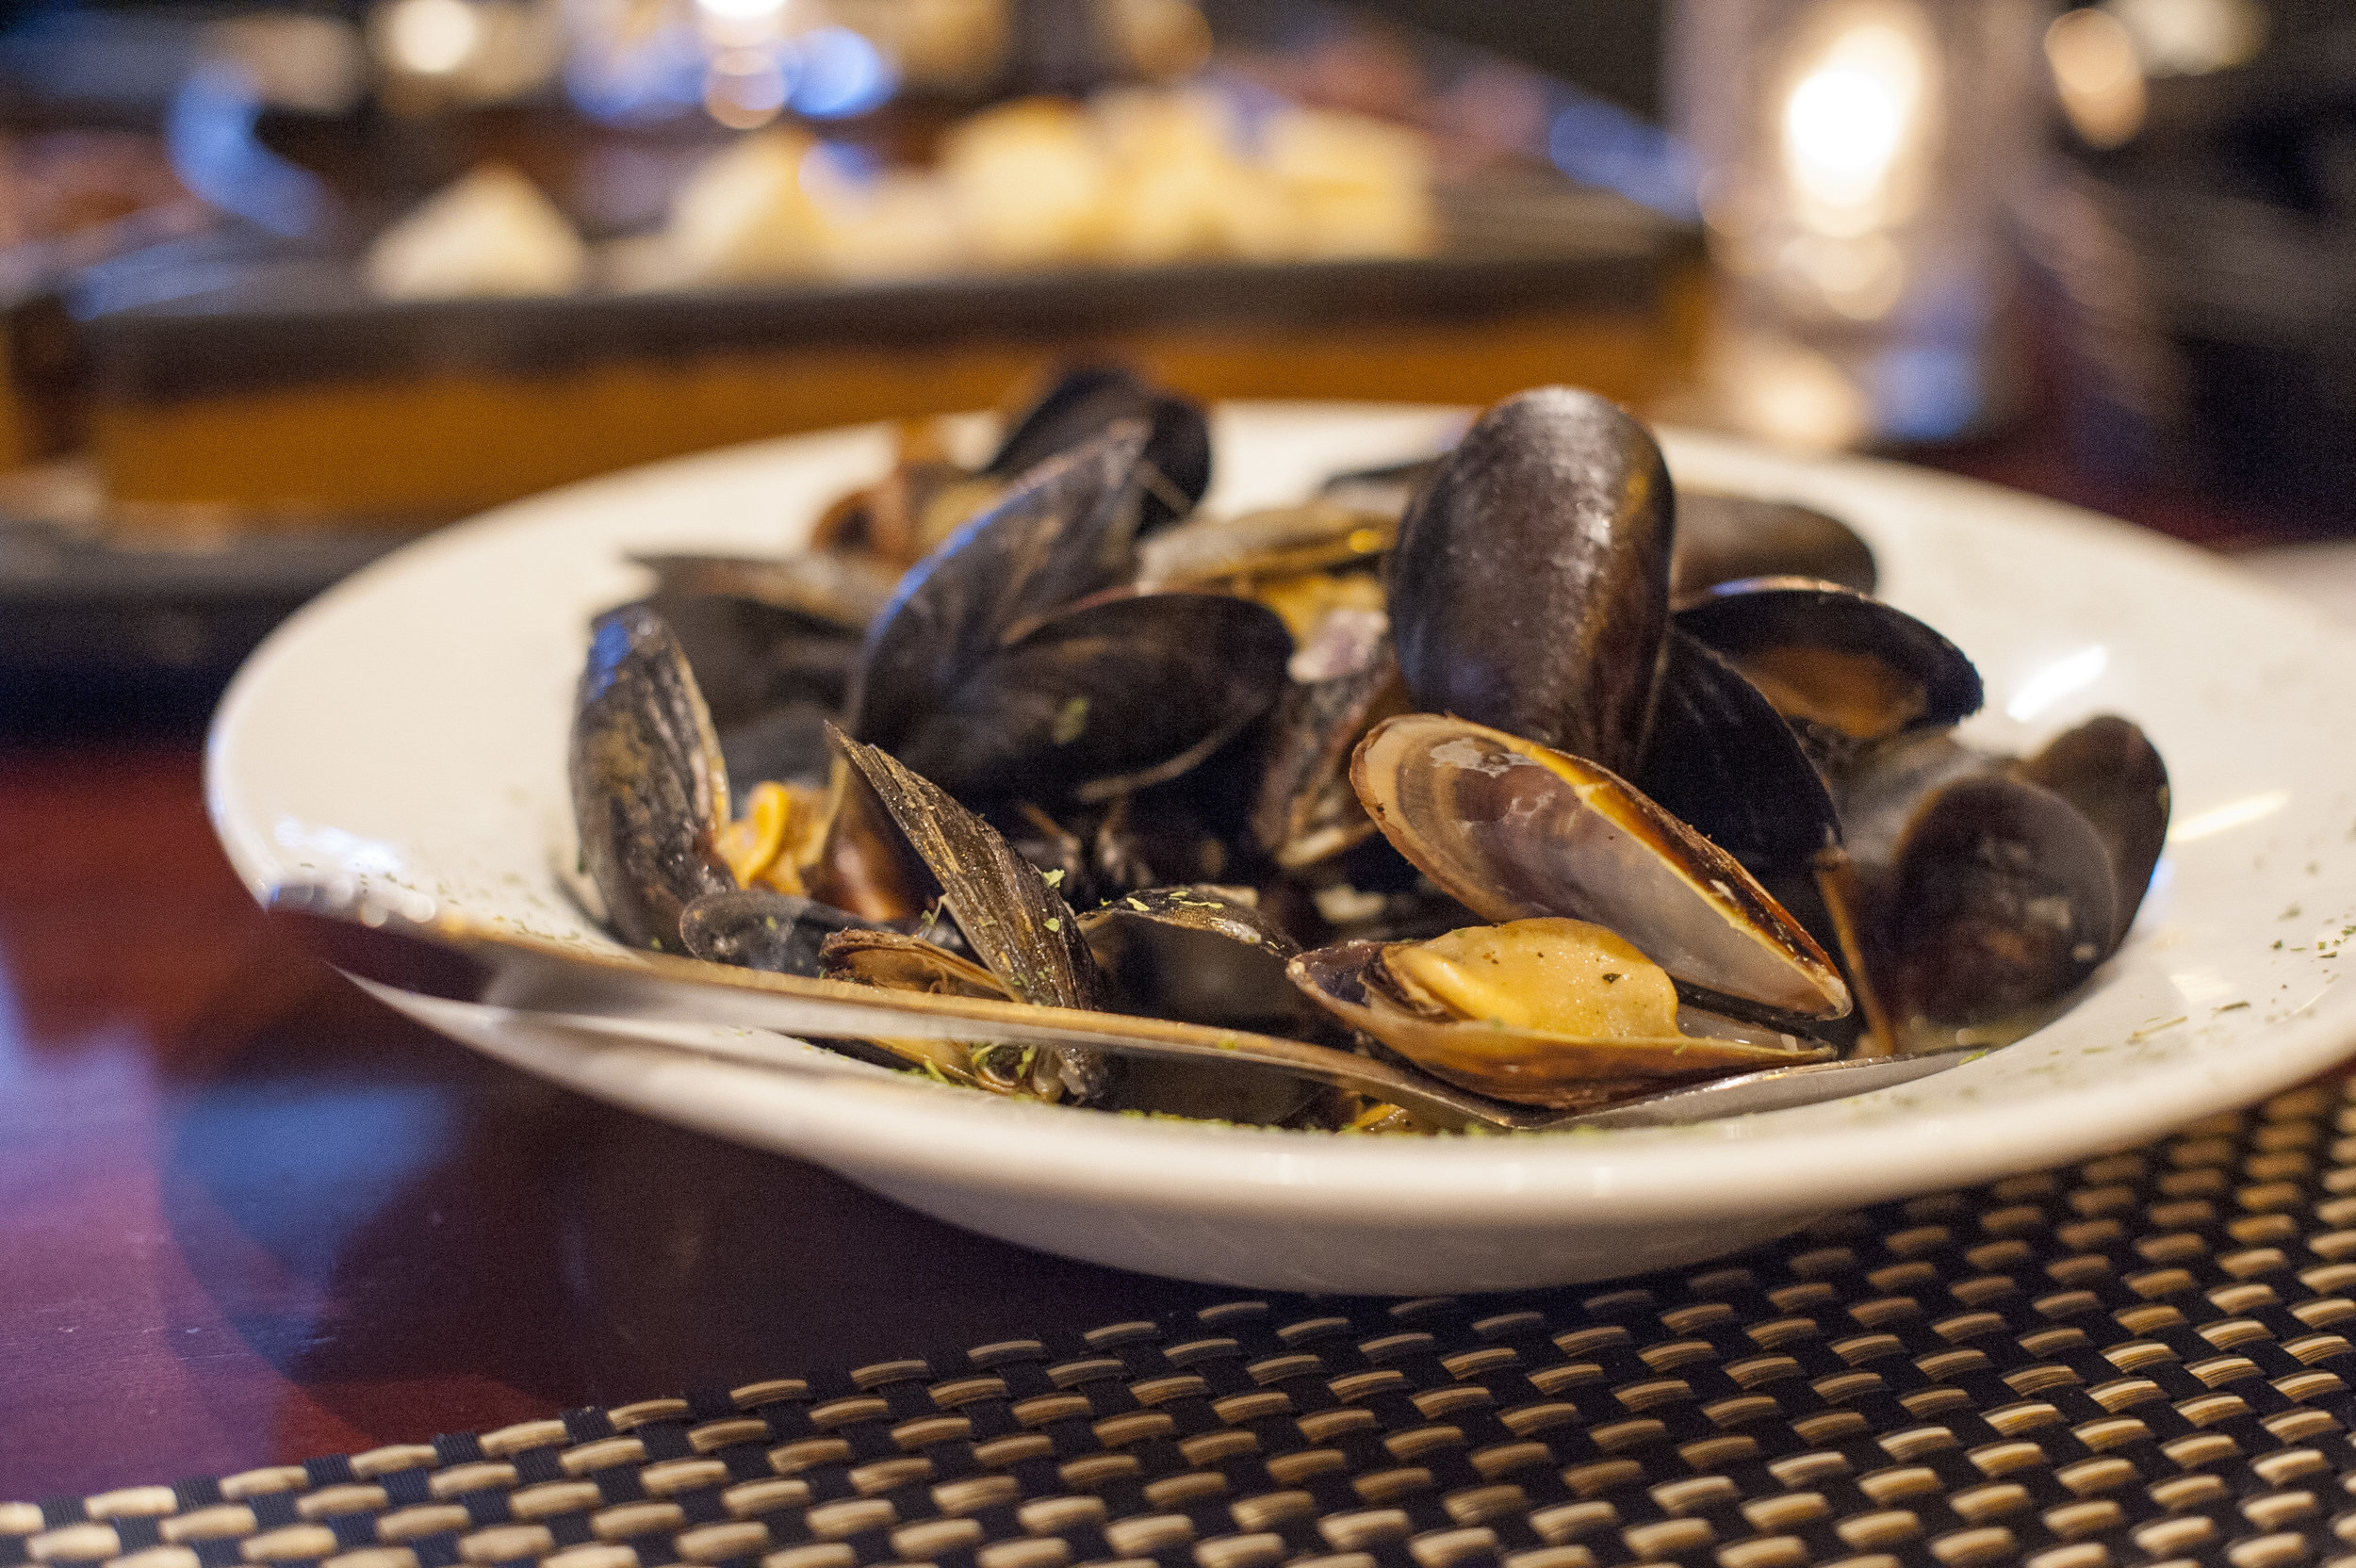   The P.E.I. Mussels are available with either white wine garlic sauce or fra diavolo – they’re on the $40 menu at Black &amp; Blue as an appetizer choice.  